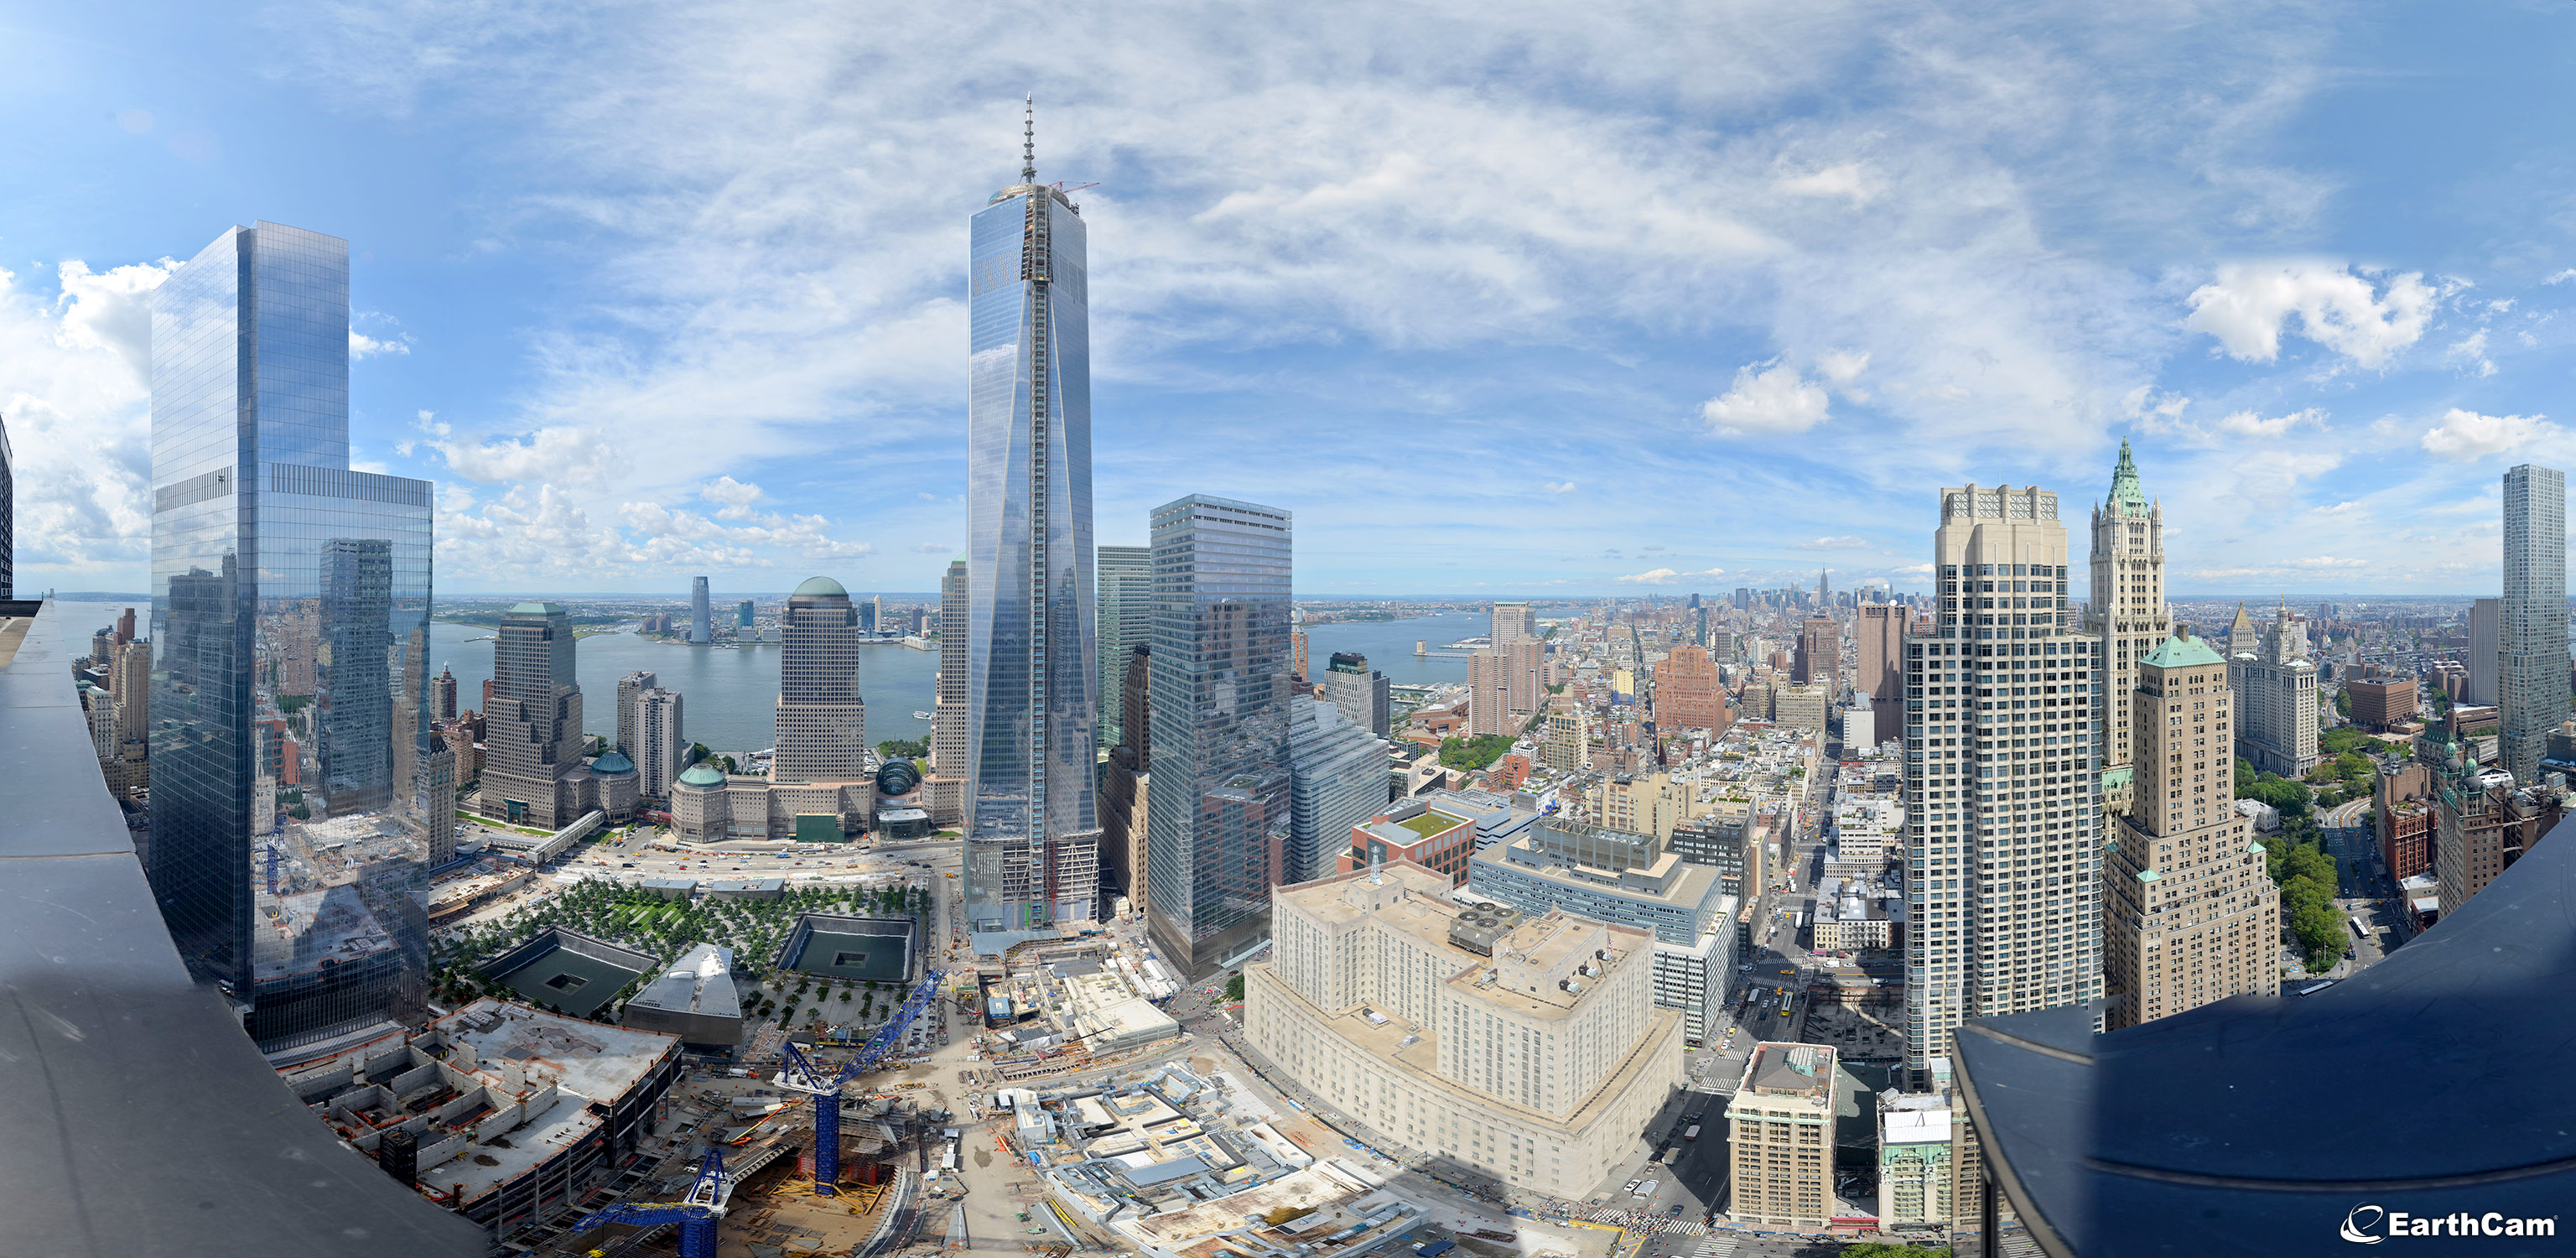 Gigapixel panorama of the World Trade Center in New York